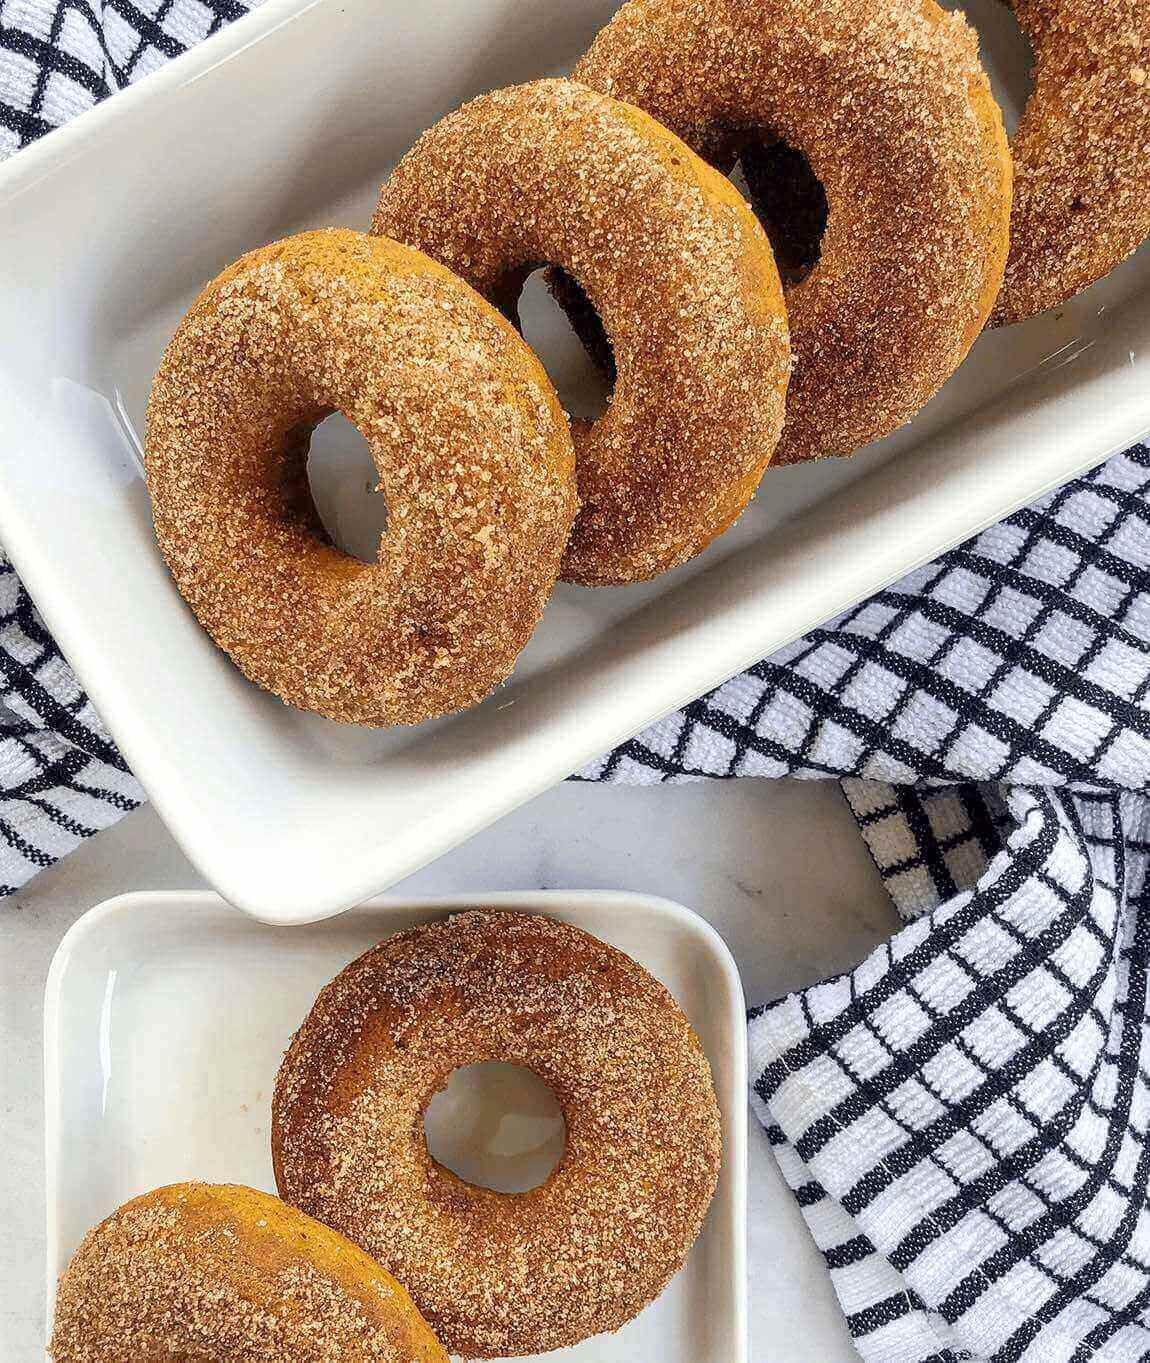 pumpkin donuts with sugar coating on plate.